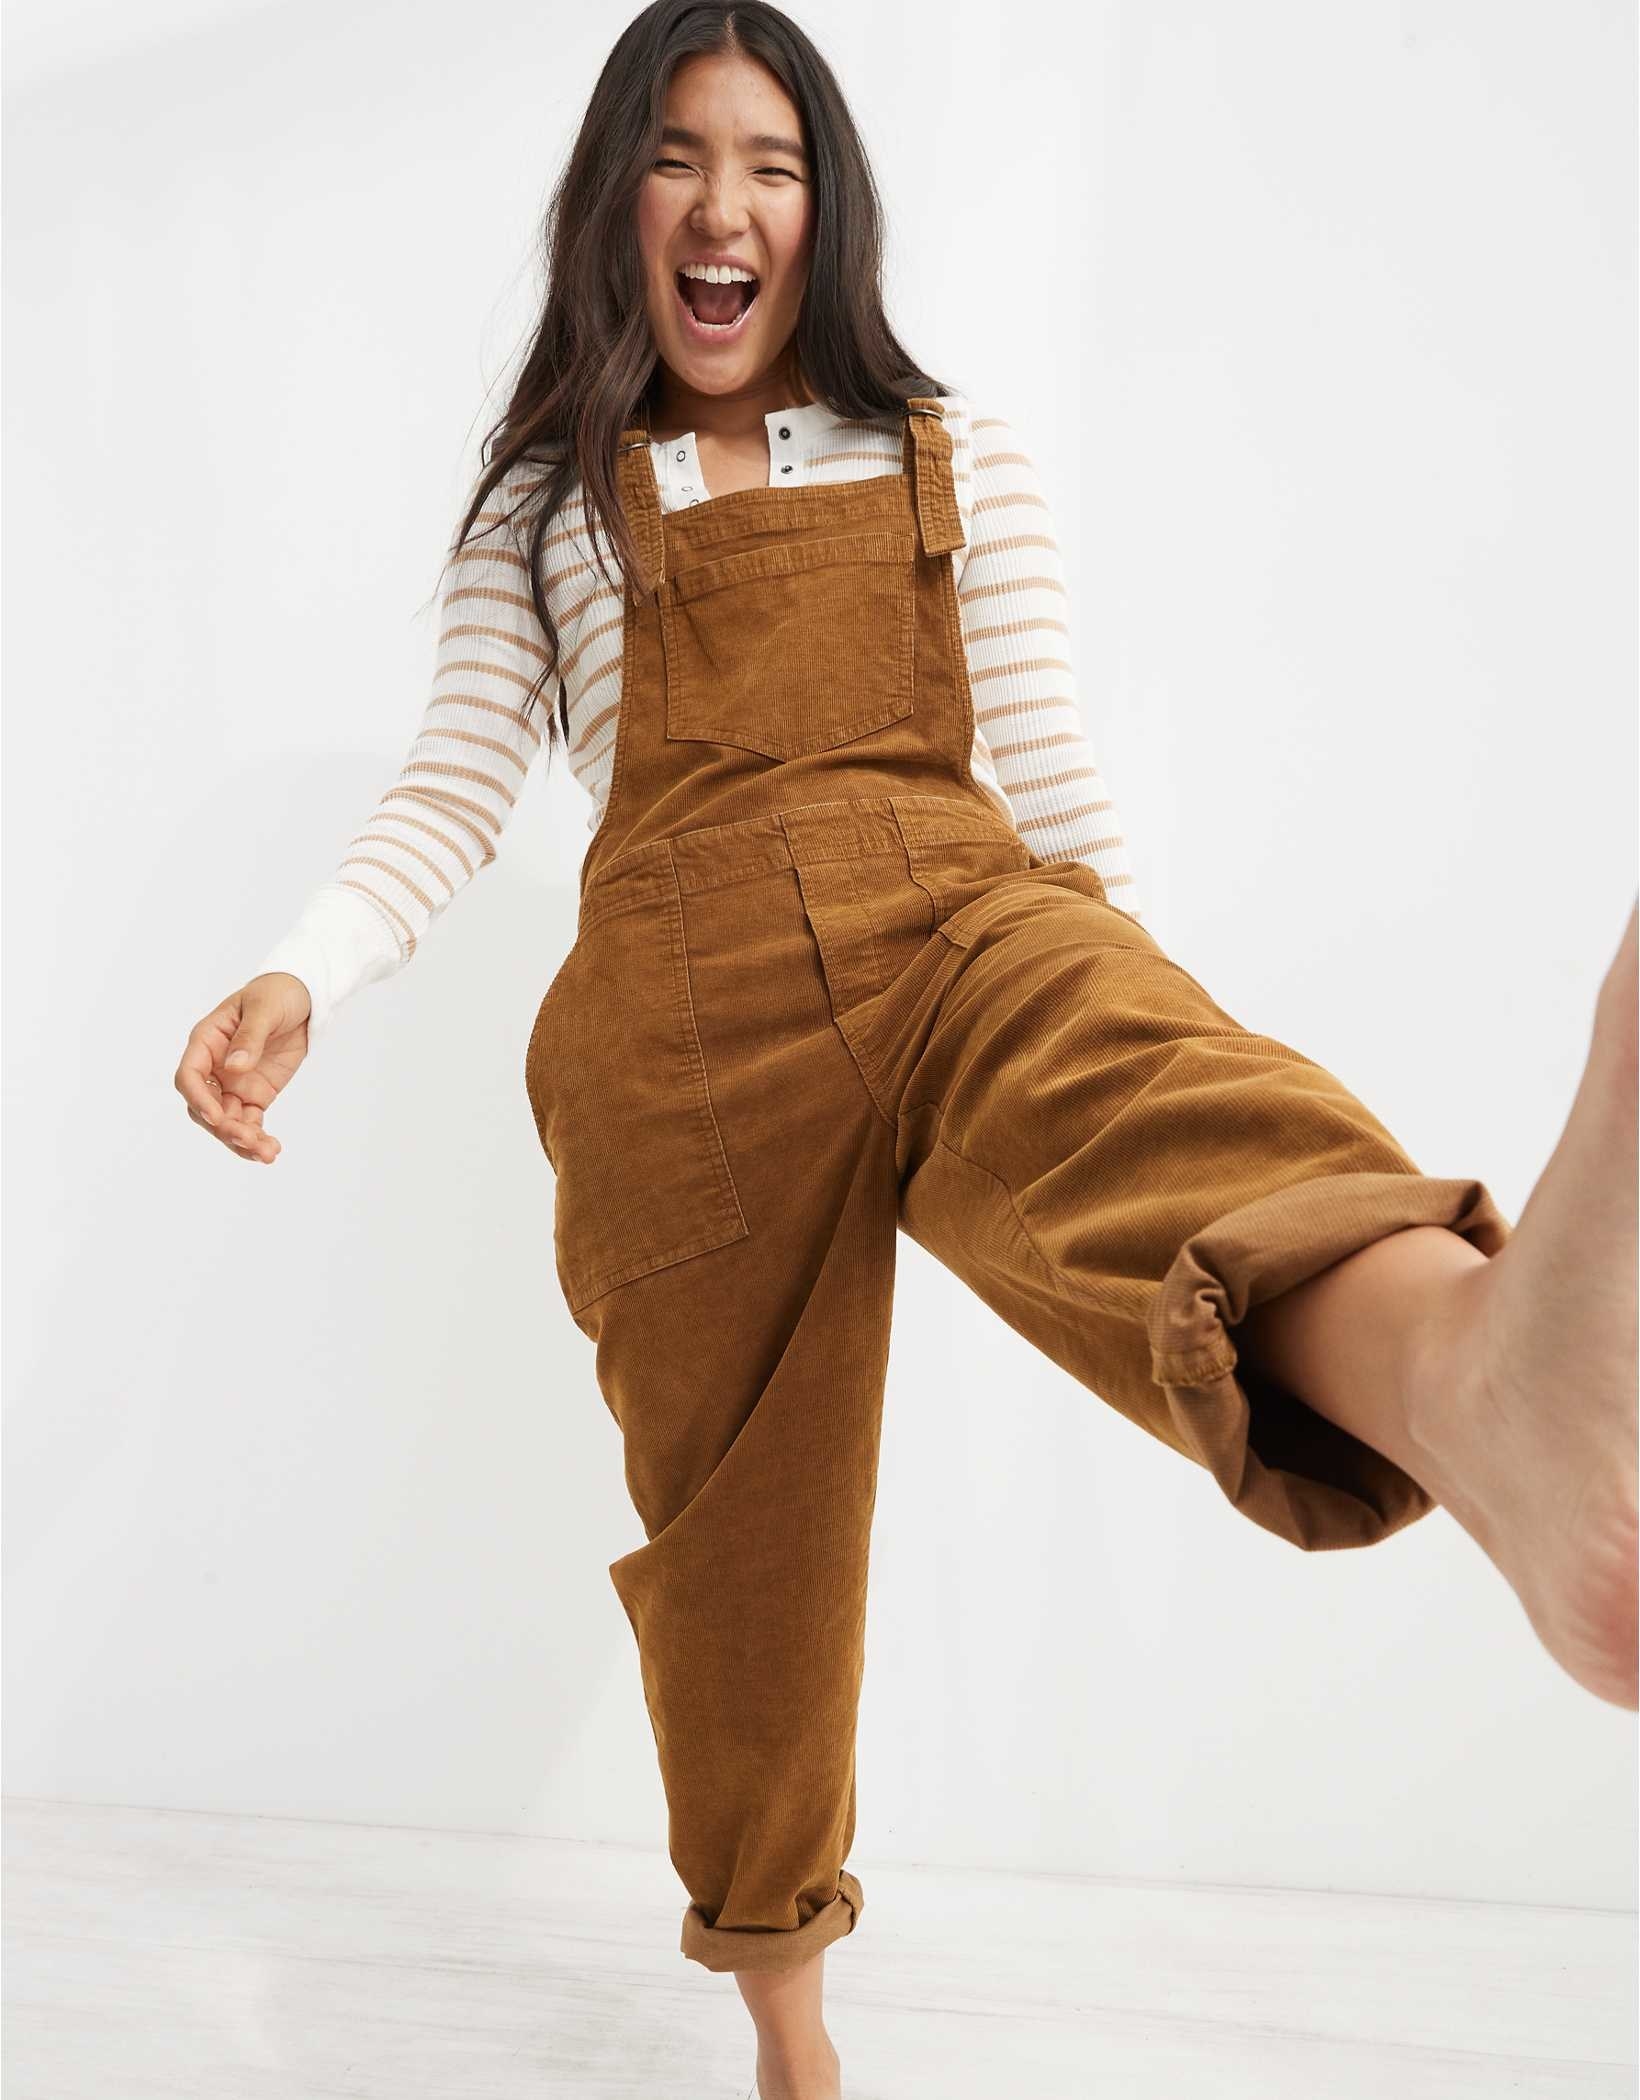 model wearing the tan overalls with a tan and white striped long sleeve top underneath and one leg up in a kick